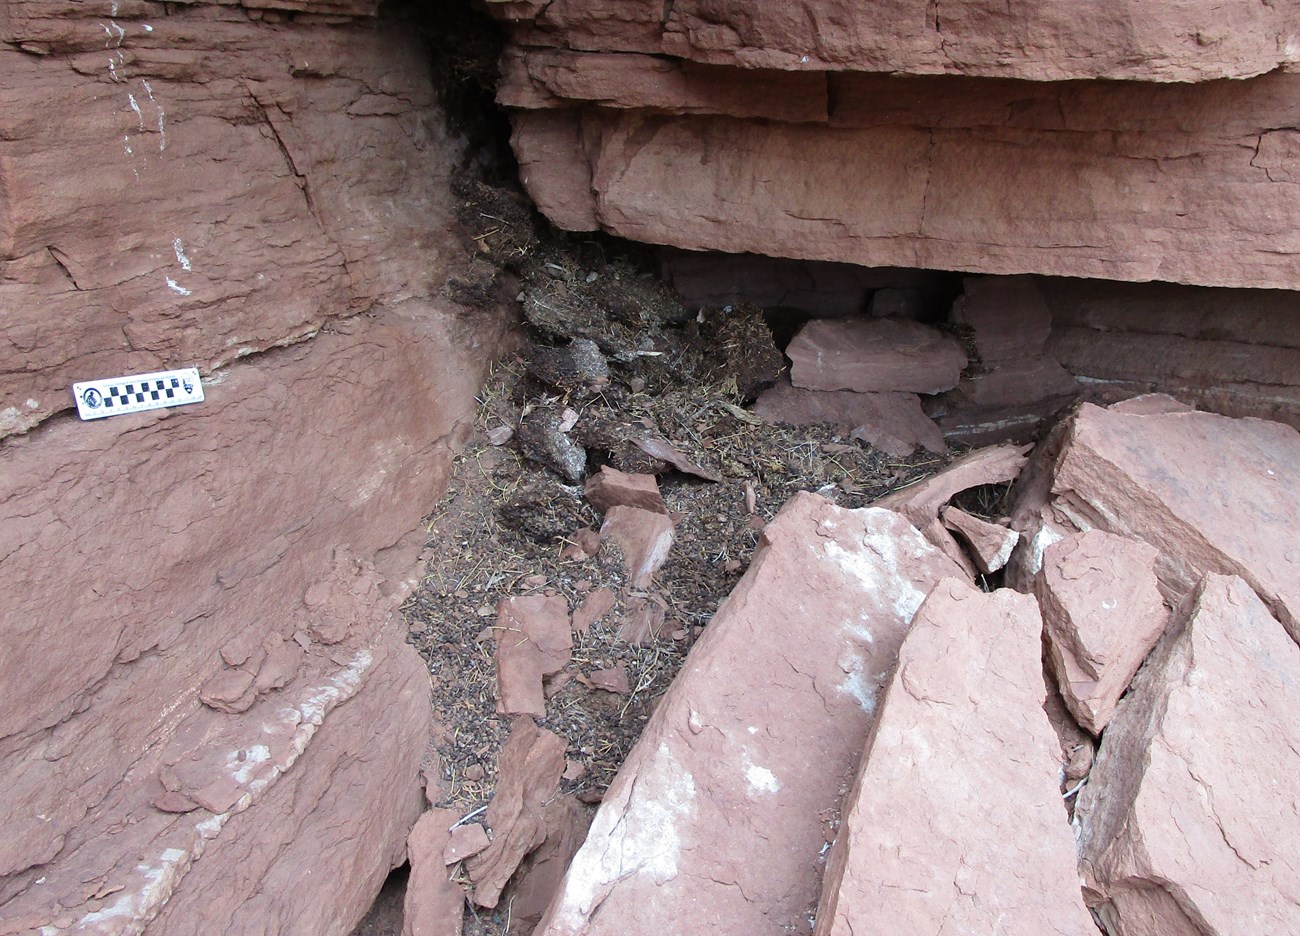 Photo of a crevasse in a layered rock face where debris from a large rat's nest is evident